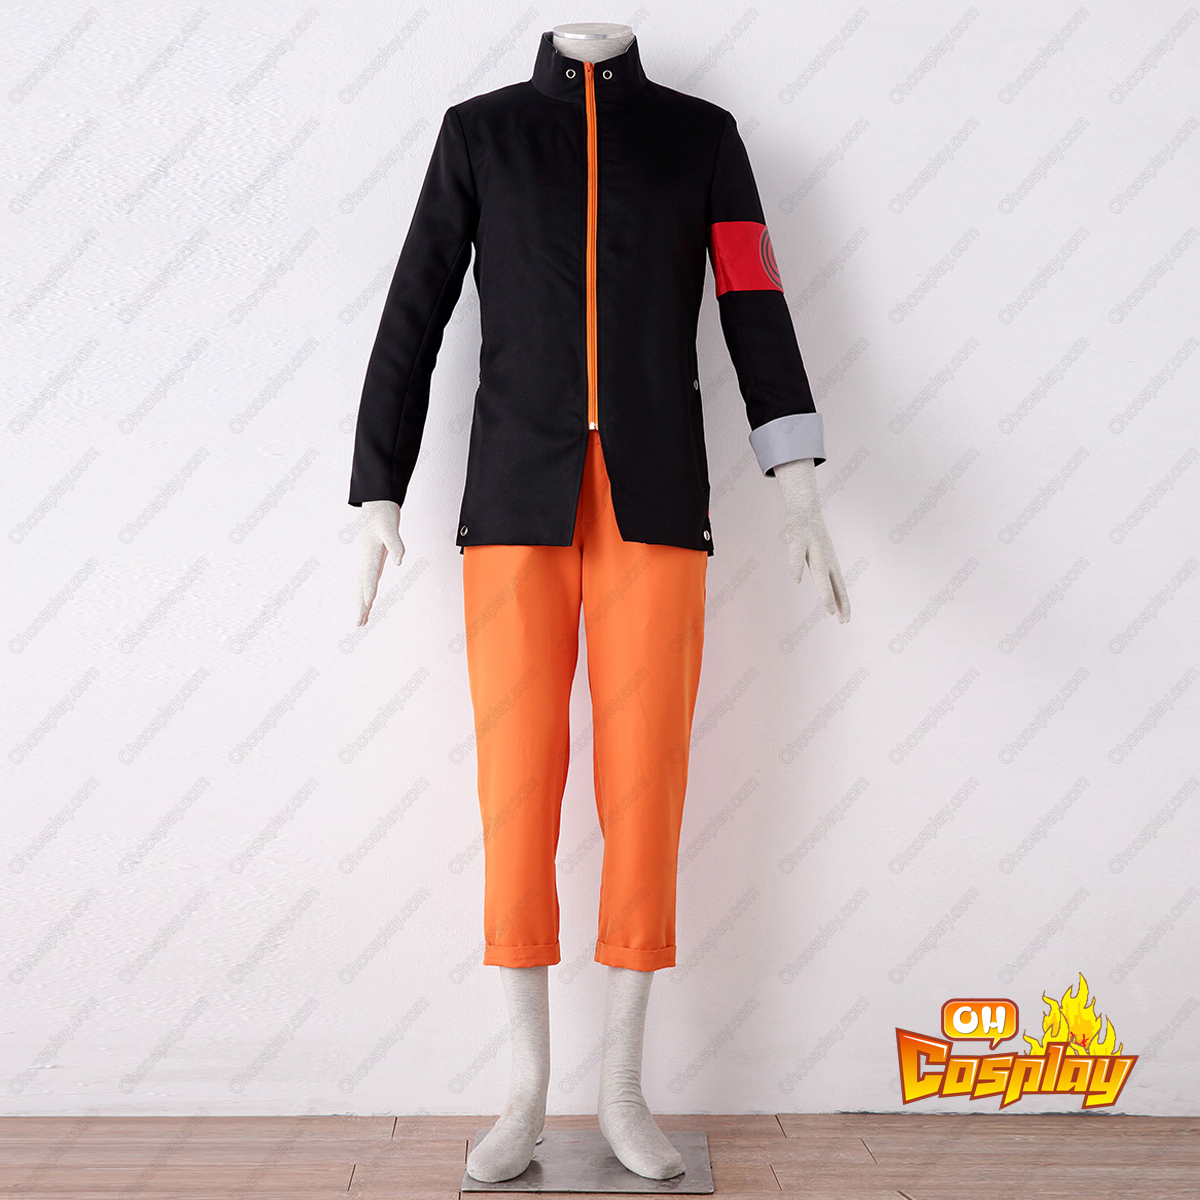 Naruto The Last Naruto 8TH Cosplay Costumes Deluxe Edition